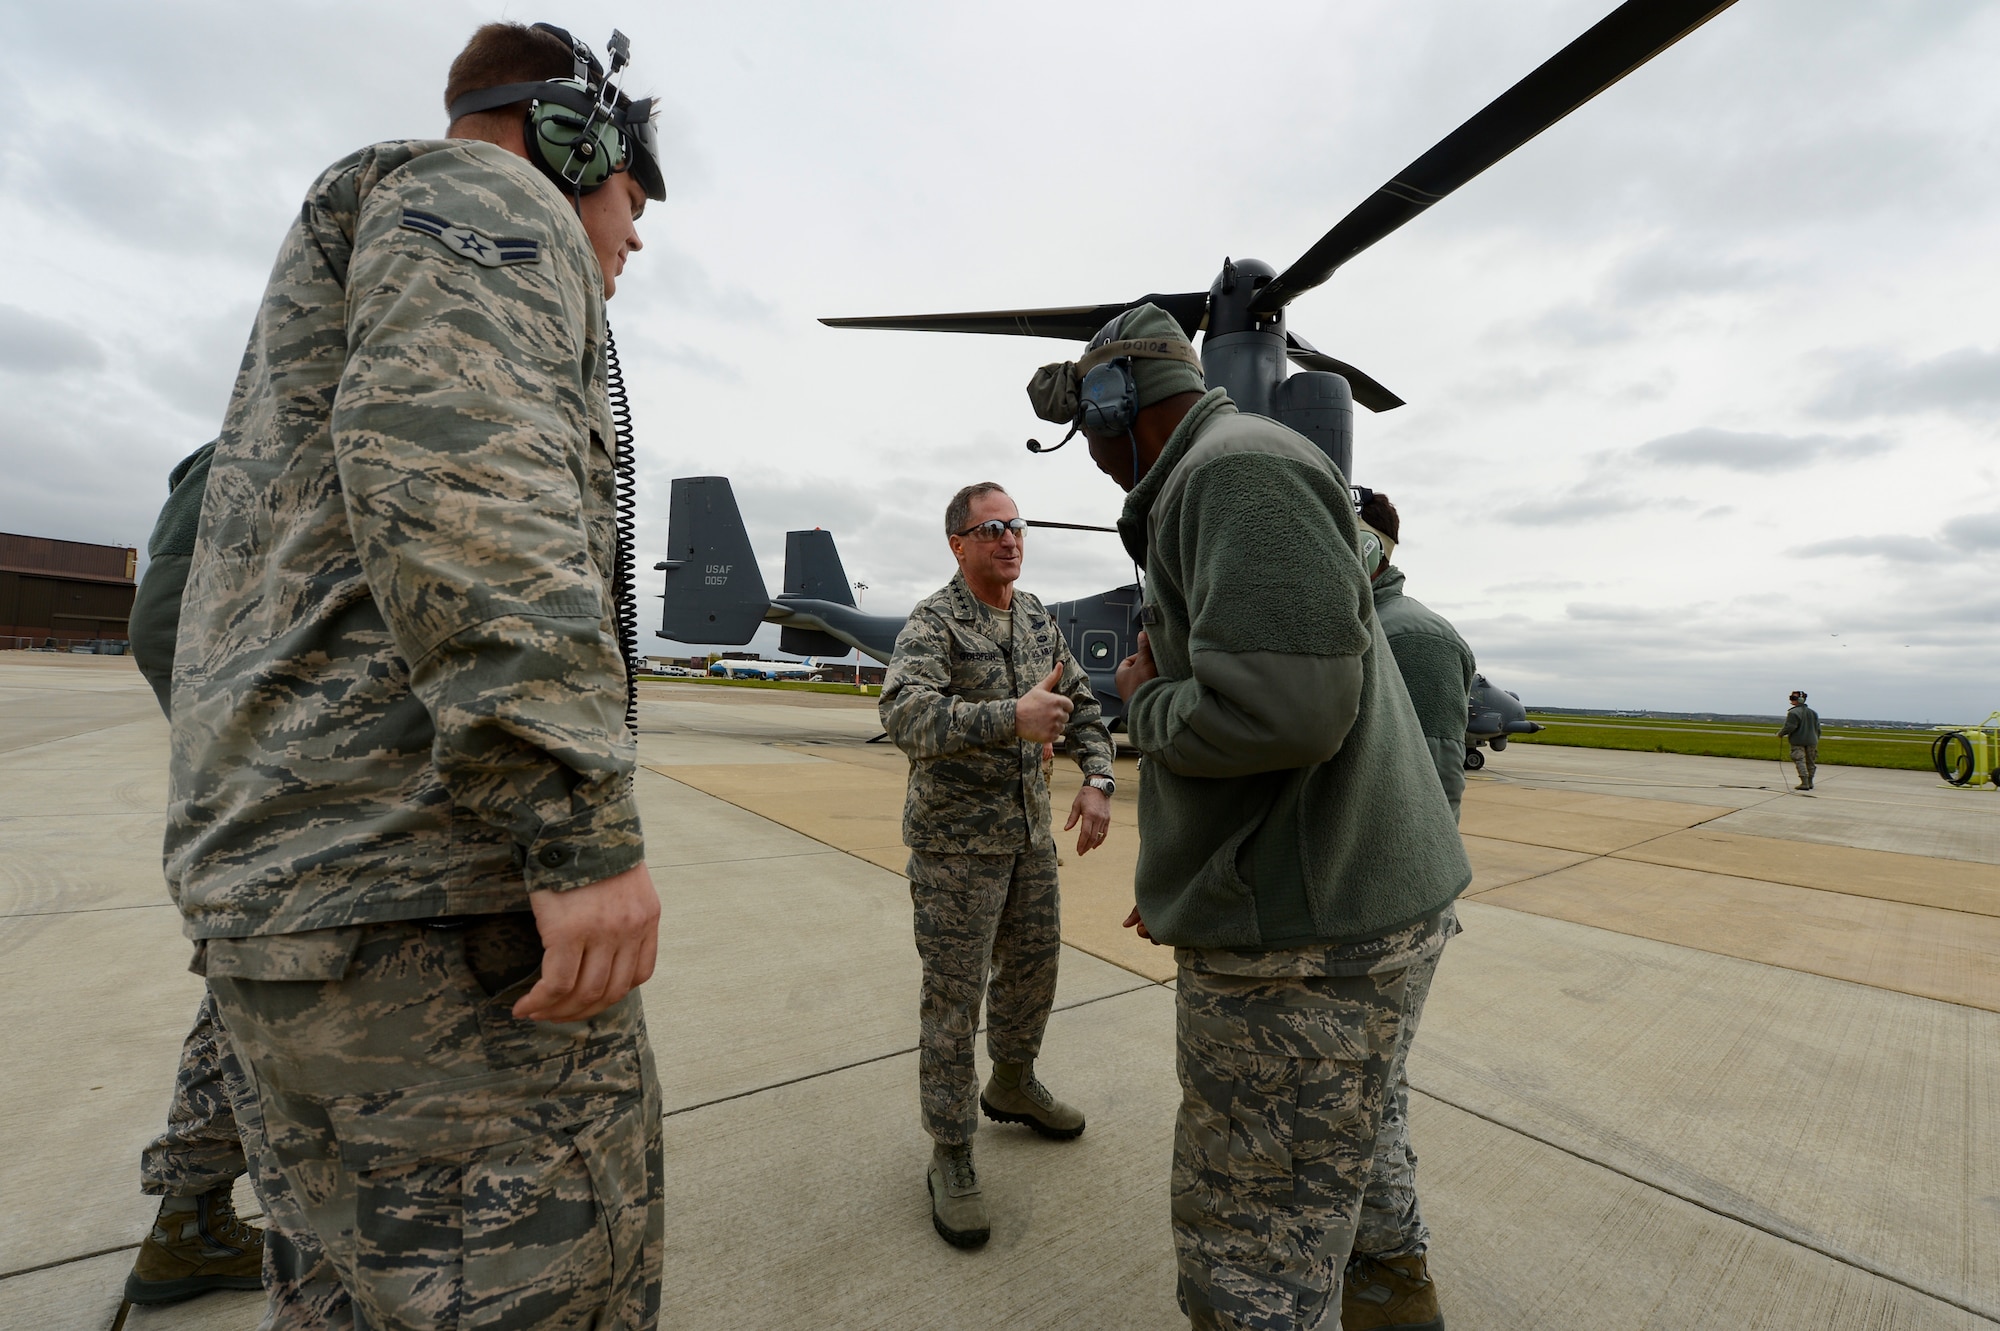 Air Force Vice Chief of Staff Gen. David Goldfein shakes hands with Airmen at Royal Air Force Mildenhall, England, April 19, 2016, after an orientation flight on a CV-22 Osprey during weeklong civic leader trip to several bases in Europe. Air Force civic leaders are unpaid advisers, key communicators and advocates for the Air Force. (U.S. Air Force photo/Tech. Sgt. Joshua DeMotts)